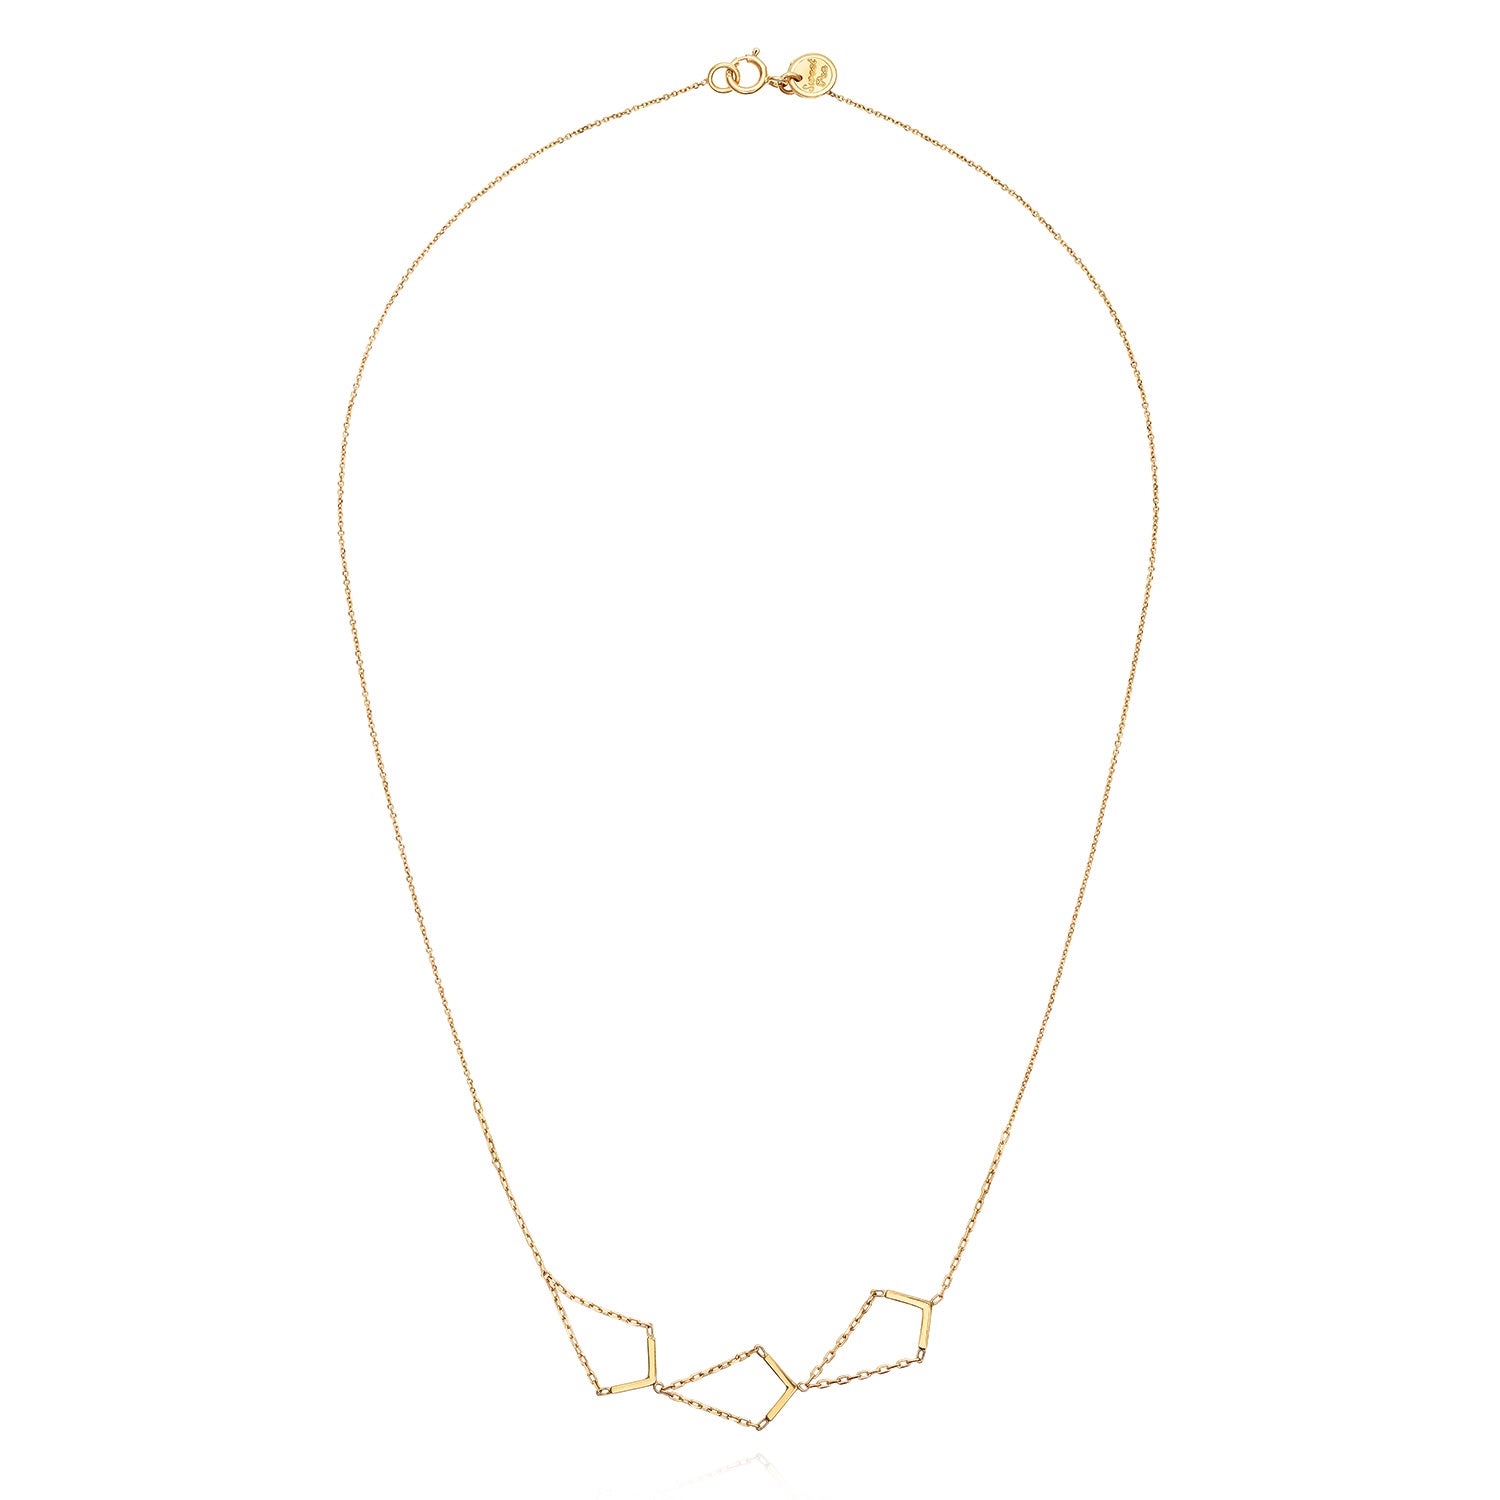 18ct yellow gold necklace with section of 3 V-shapes